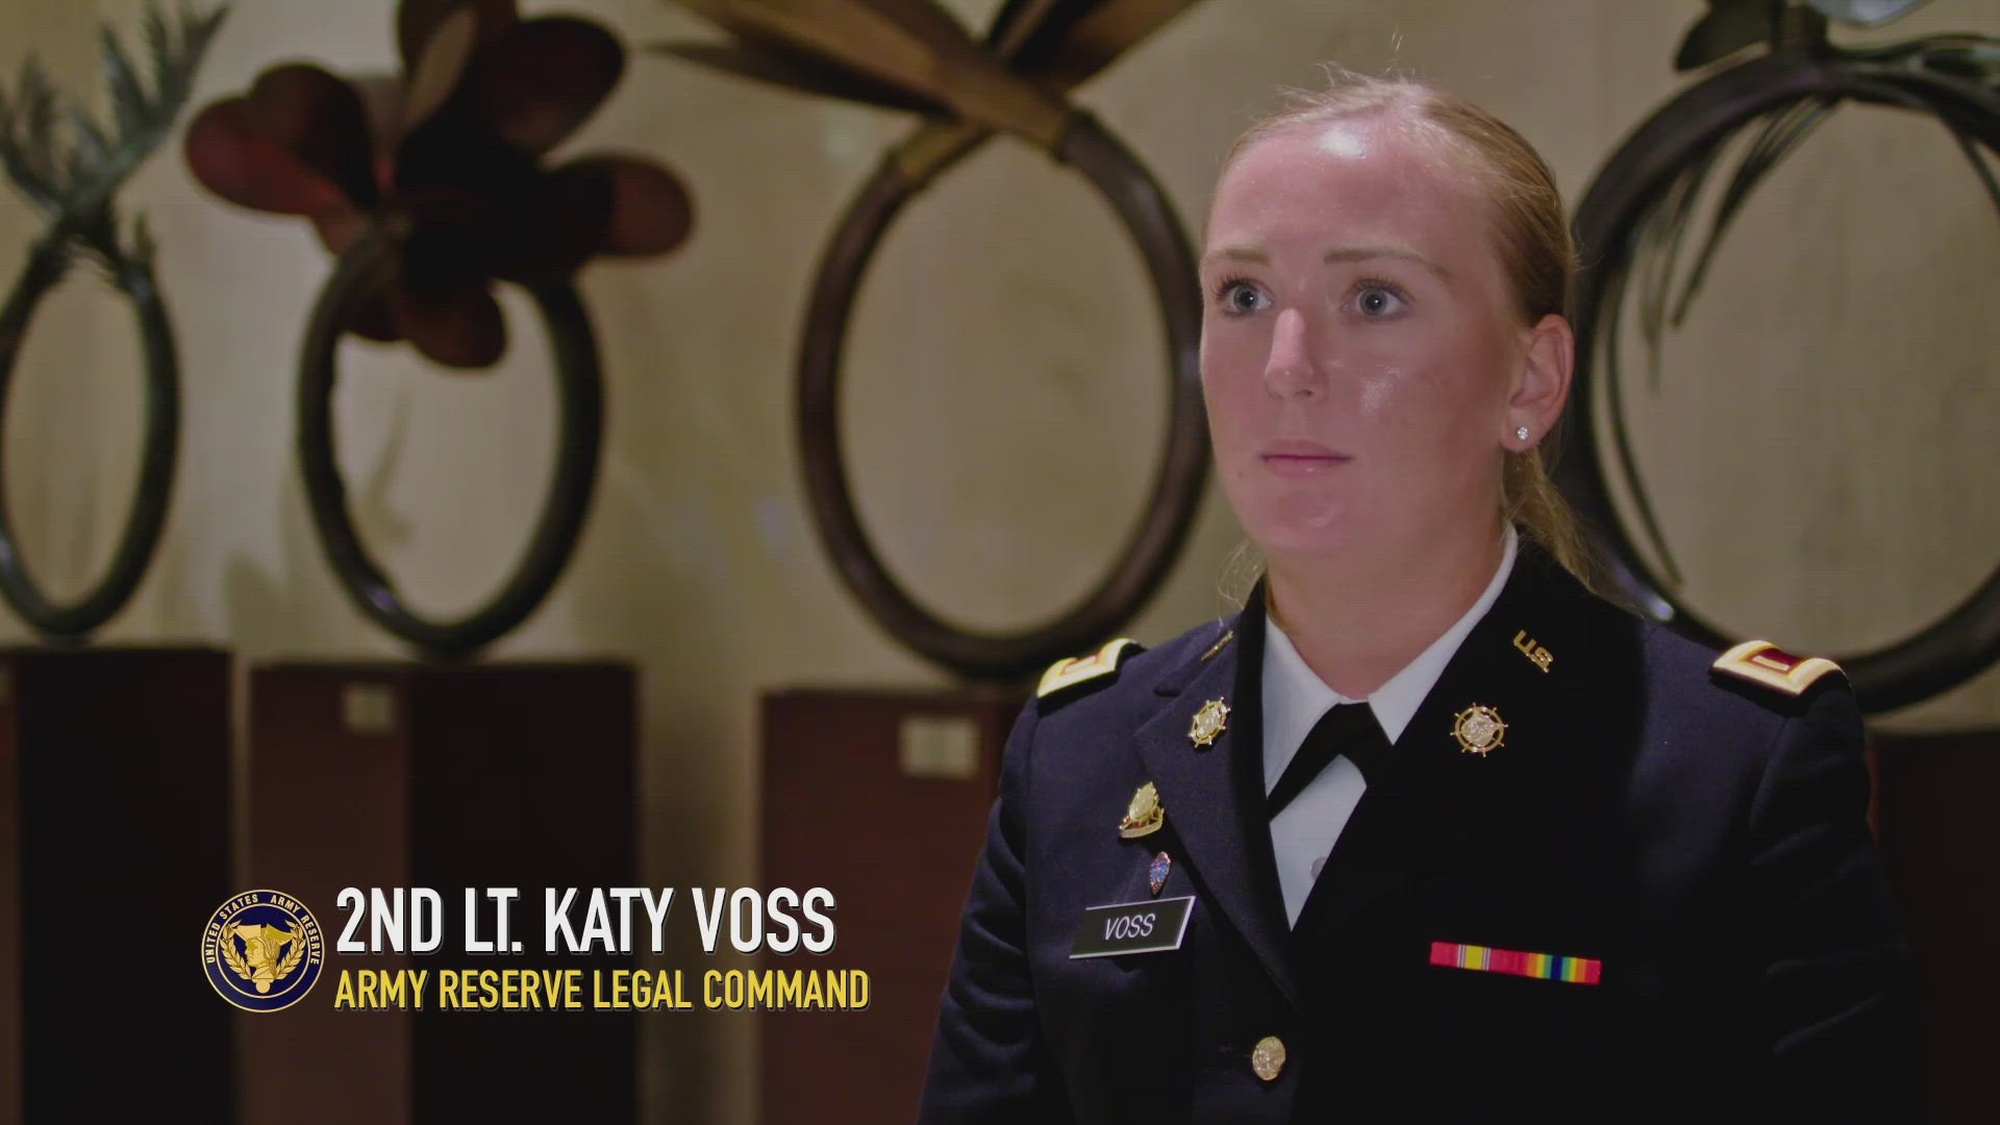 2nd Lt. Katy Voss, Army Reserve Legal Command and 1st Lt. Jessica Romero, 416th Theater Engineer Command speaks on what is means to serve as a woman in the U.S. Military. Women's Equality Day is celebrated in the United States on August 26 to commemorate the 1920 adoption of the 19th Amendment to the Constitution, which prohibits the states and the federal government from denying U.S. women the right to vote. Today, Women’s Equality Day celebrates the achievements of women’s rights and reminds us of the women who paved the way for women to serve and fight alongside men in combat today.